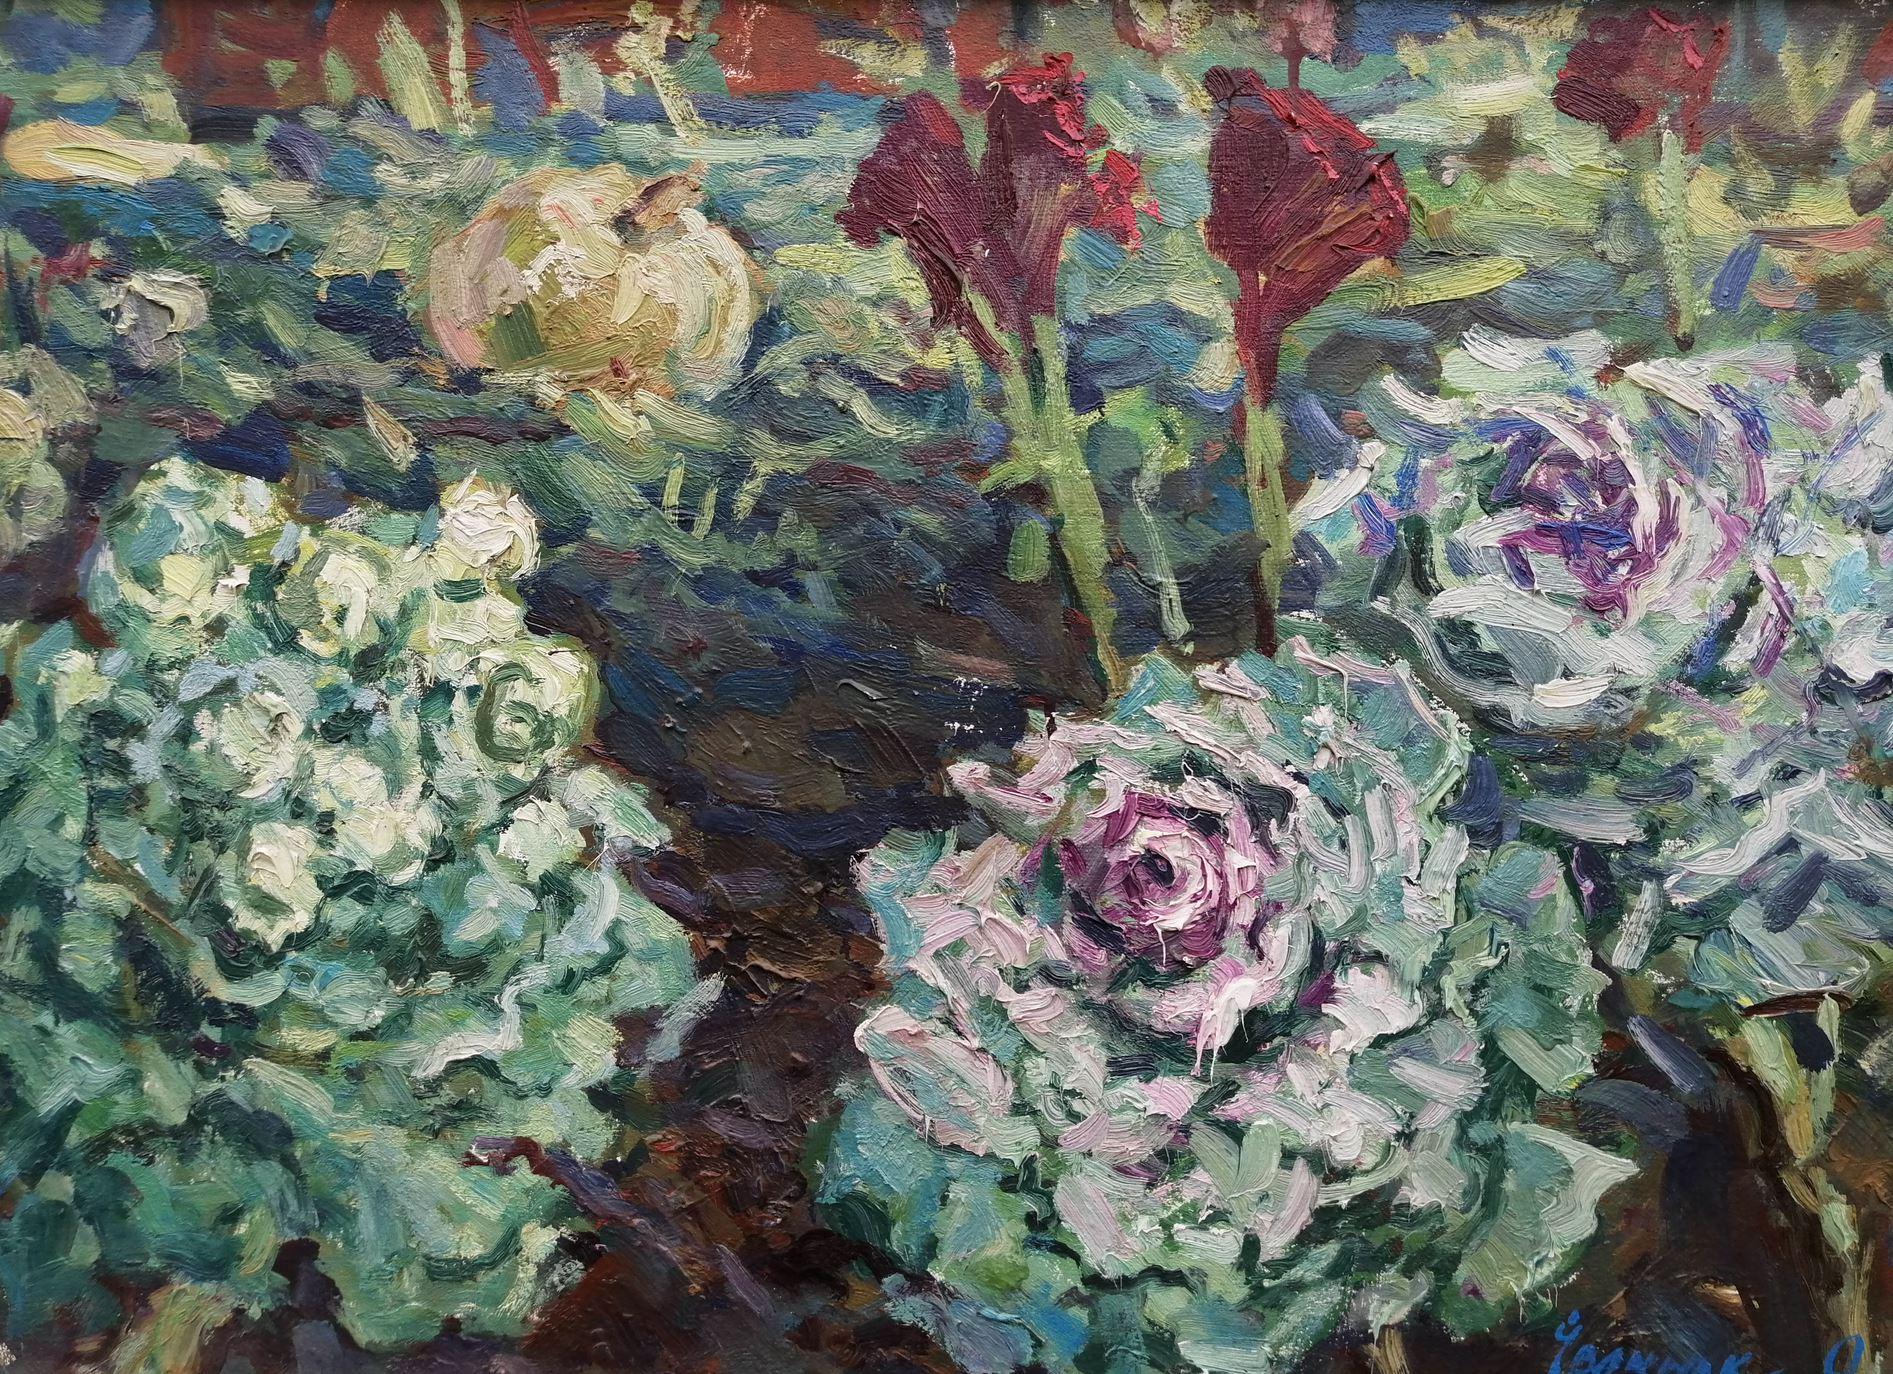 Artist: Alex Kalenyuk 
Work: Original oil painting, handmade artwork, one of a kind 
Medium: Oil on canvas 
Year: 2006
Style: Impressionism
Title: Cabbage in the Garden, 
Size: 23.5